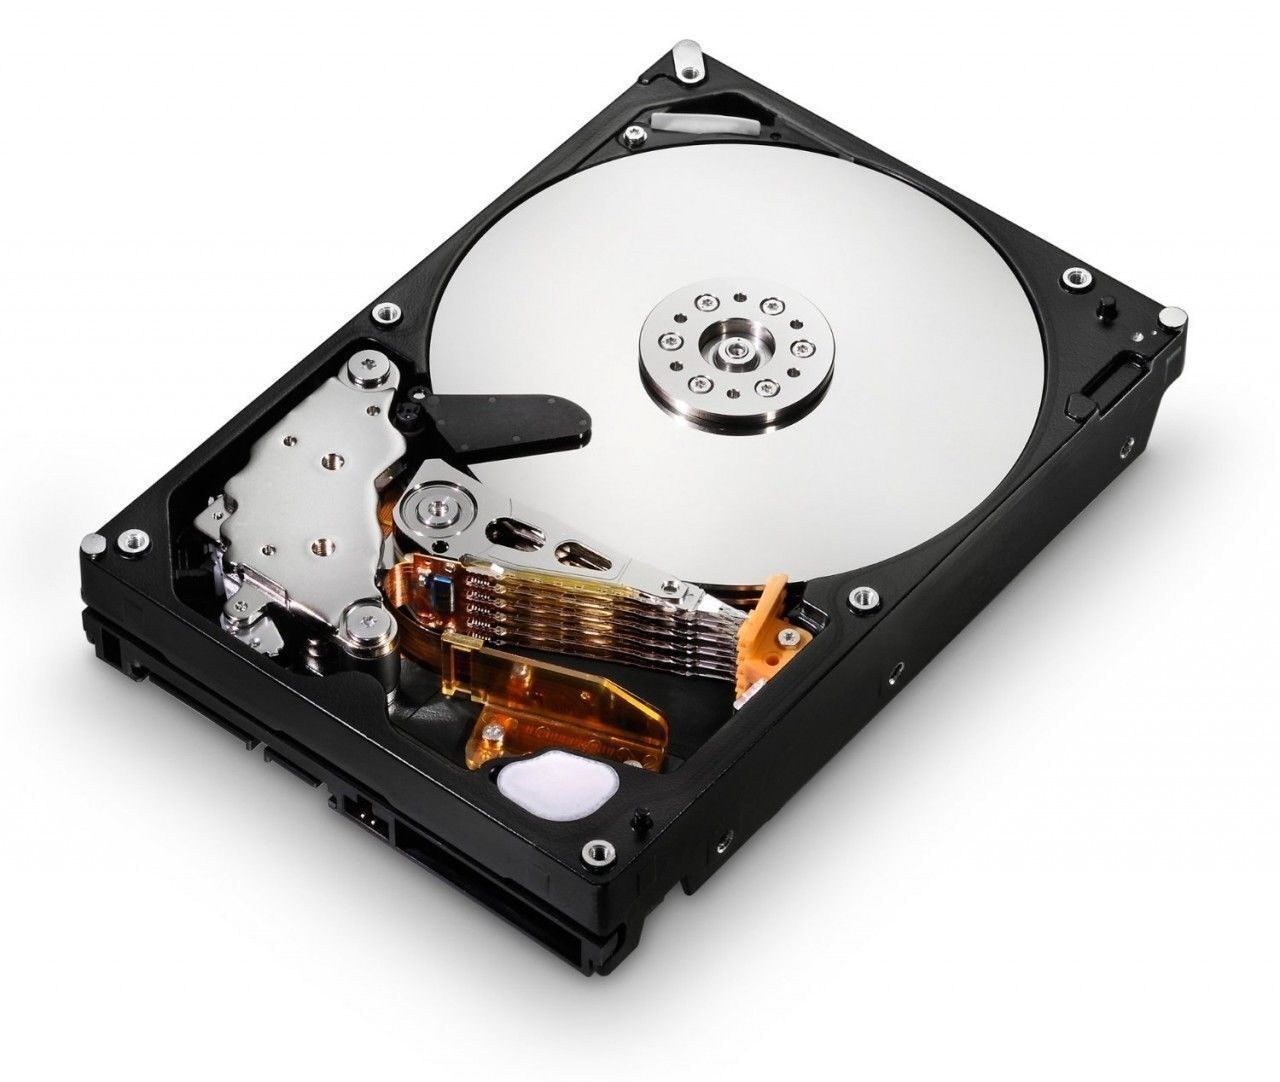 Primary image for 4TB Hard Drive for Dell XPS 730X, 730X H2C, 8300, 8500, 8700, 8900 Desktop